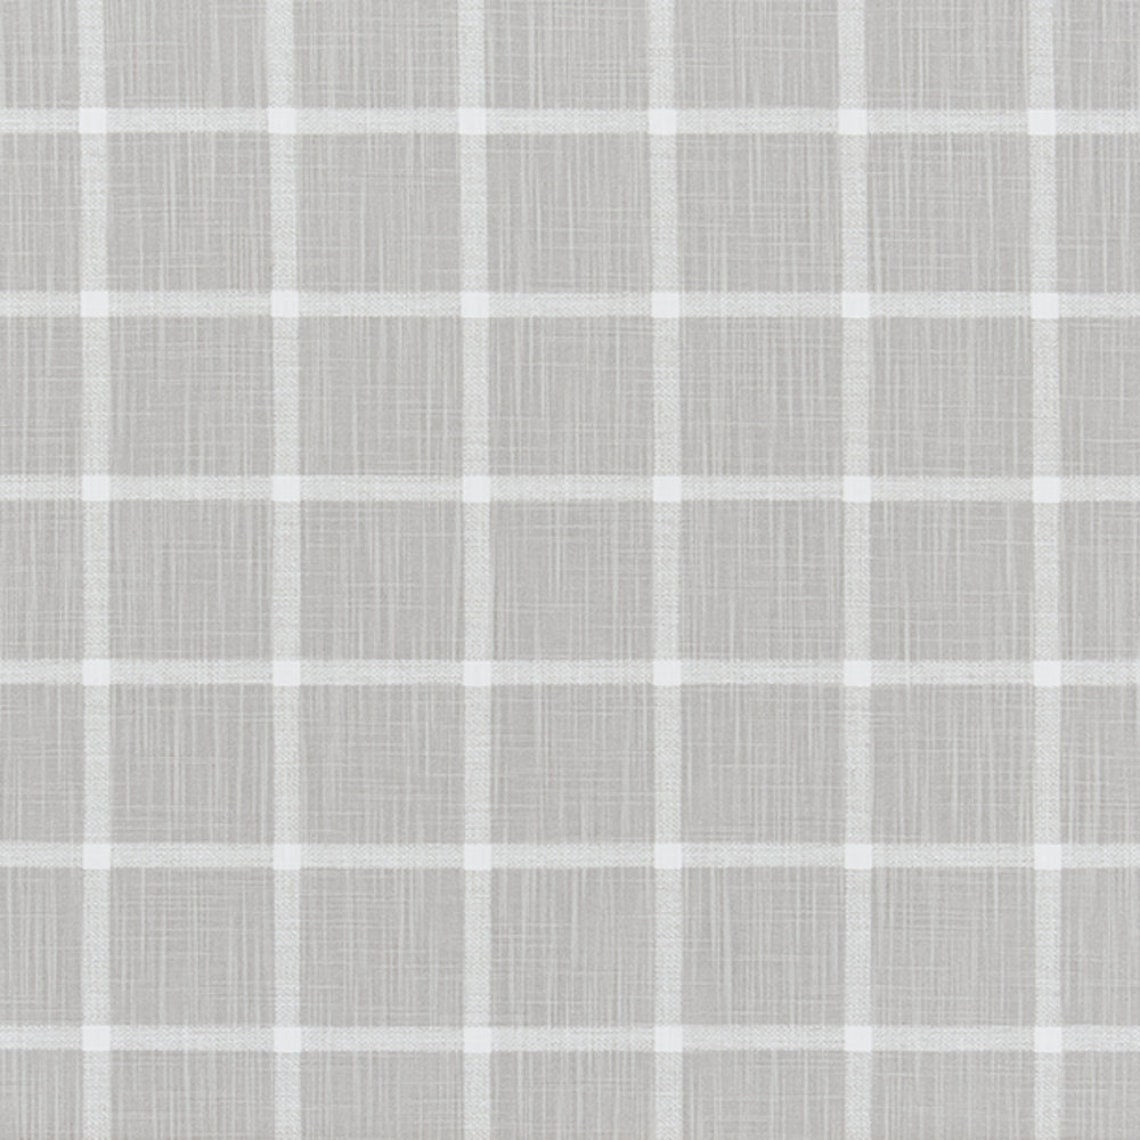 tailored bedskirt in modern farmhouse abbot french grey windowpane plaid